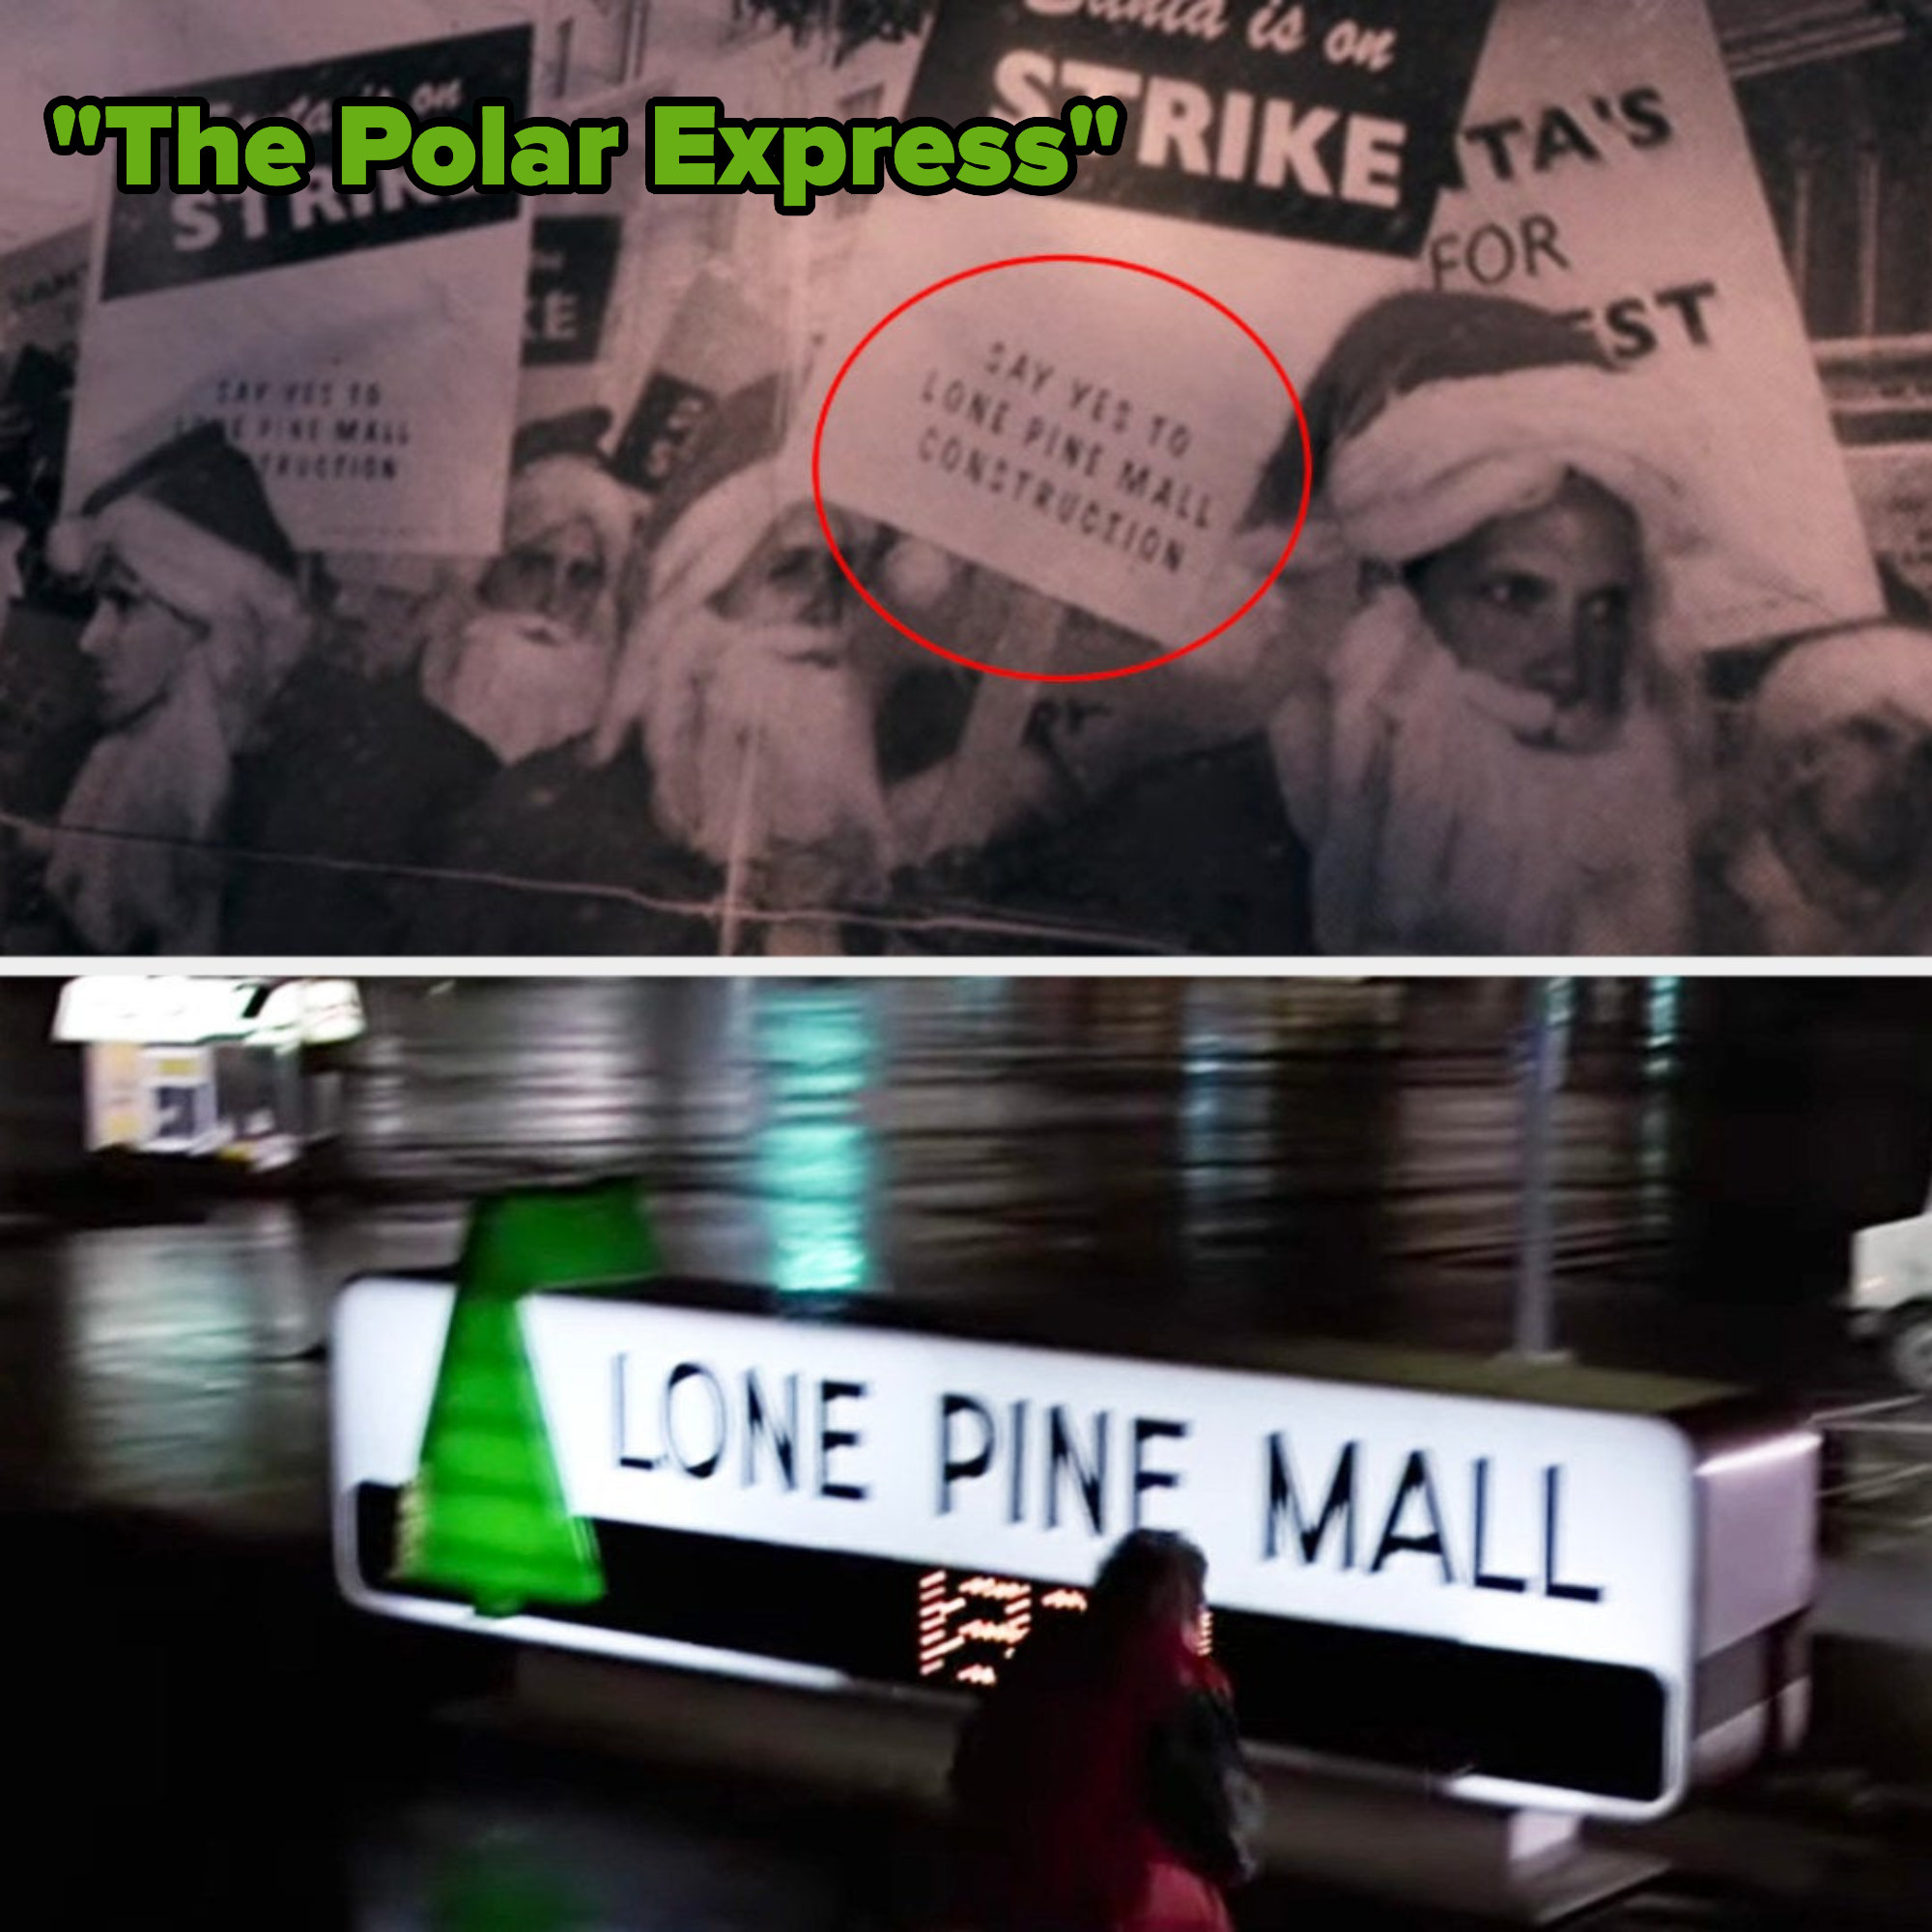 A protest sign from &quot;The Polar Express&quot; that says &quot;Say yes to Lone Pine Mall construction&quot; and a picture of Lone Pine Mall from &quot;Back to the future&quot;